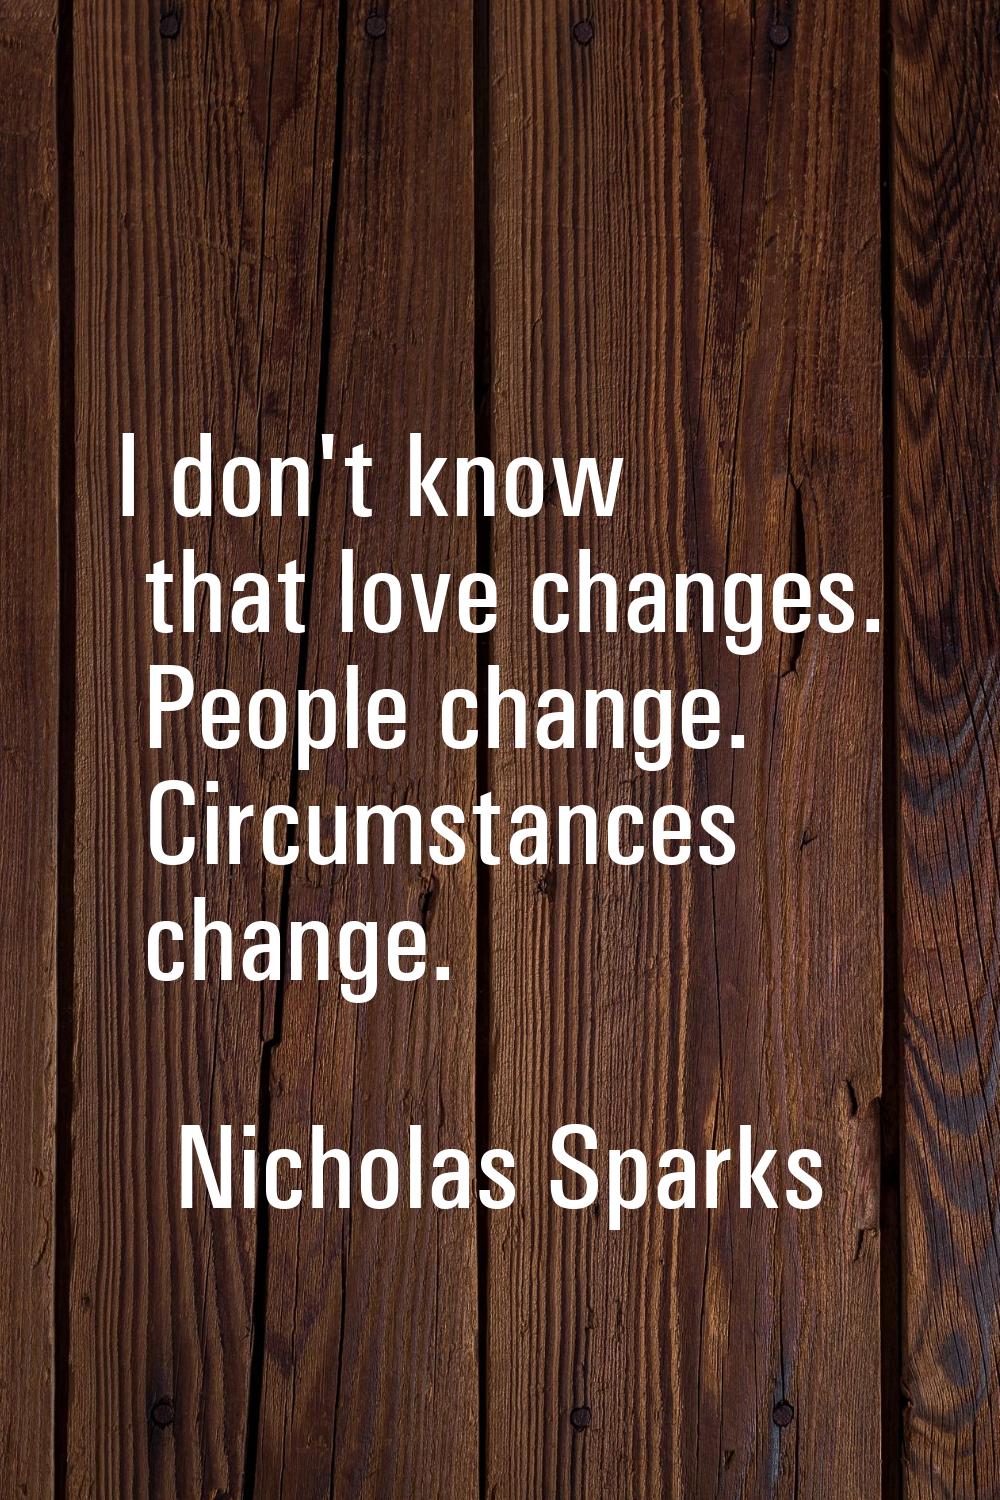 I don't know that love changes. People change. Circumstances change.